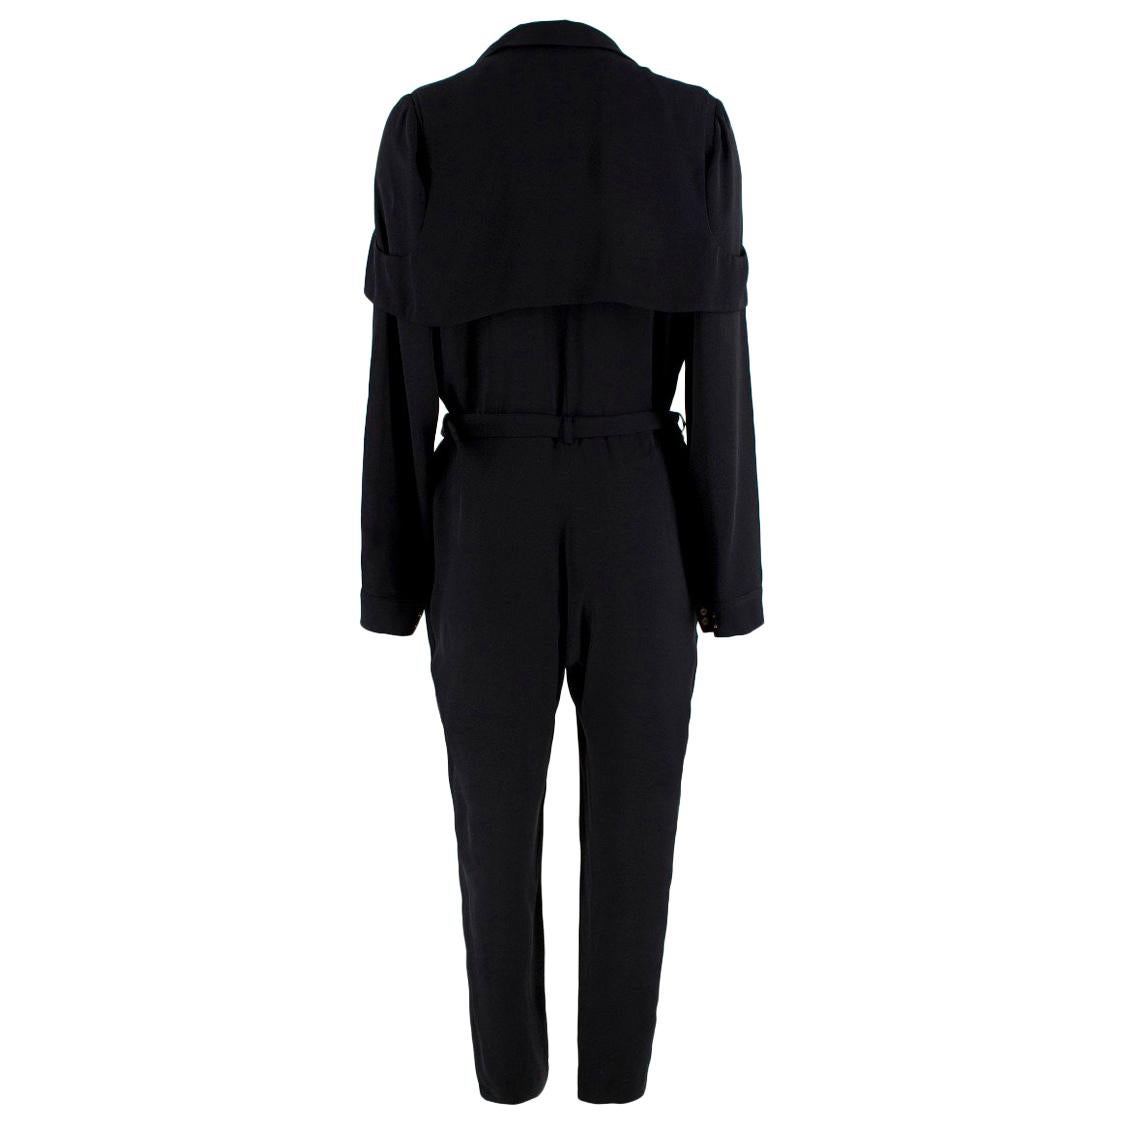 Gucci black silk-blend jumpsuit

- Black, lightweight silk-blend satin 
- Notch lapels, long sleeves, pleated cuffs
- Straight legs, slanted welt pockets  
- Wrap design
- Black trench-effect storm flap overlay 

Please note, these items are